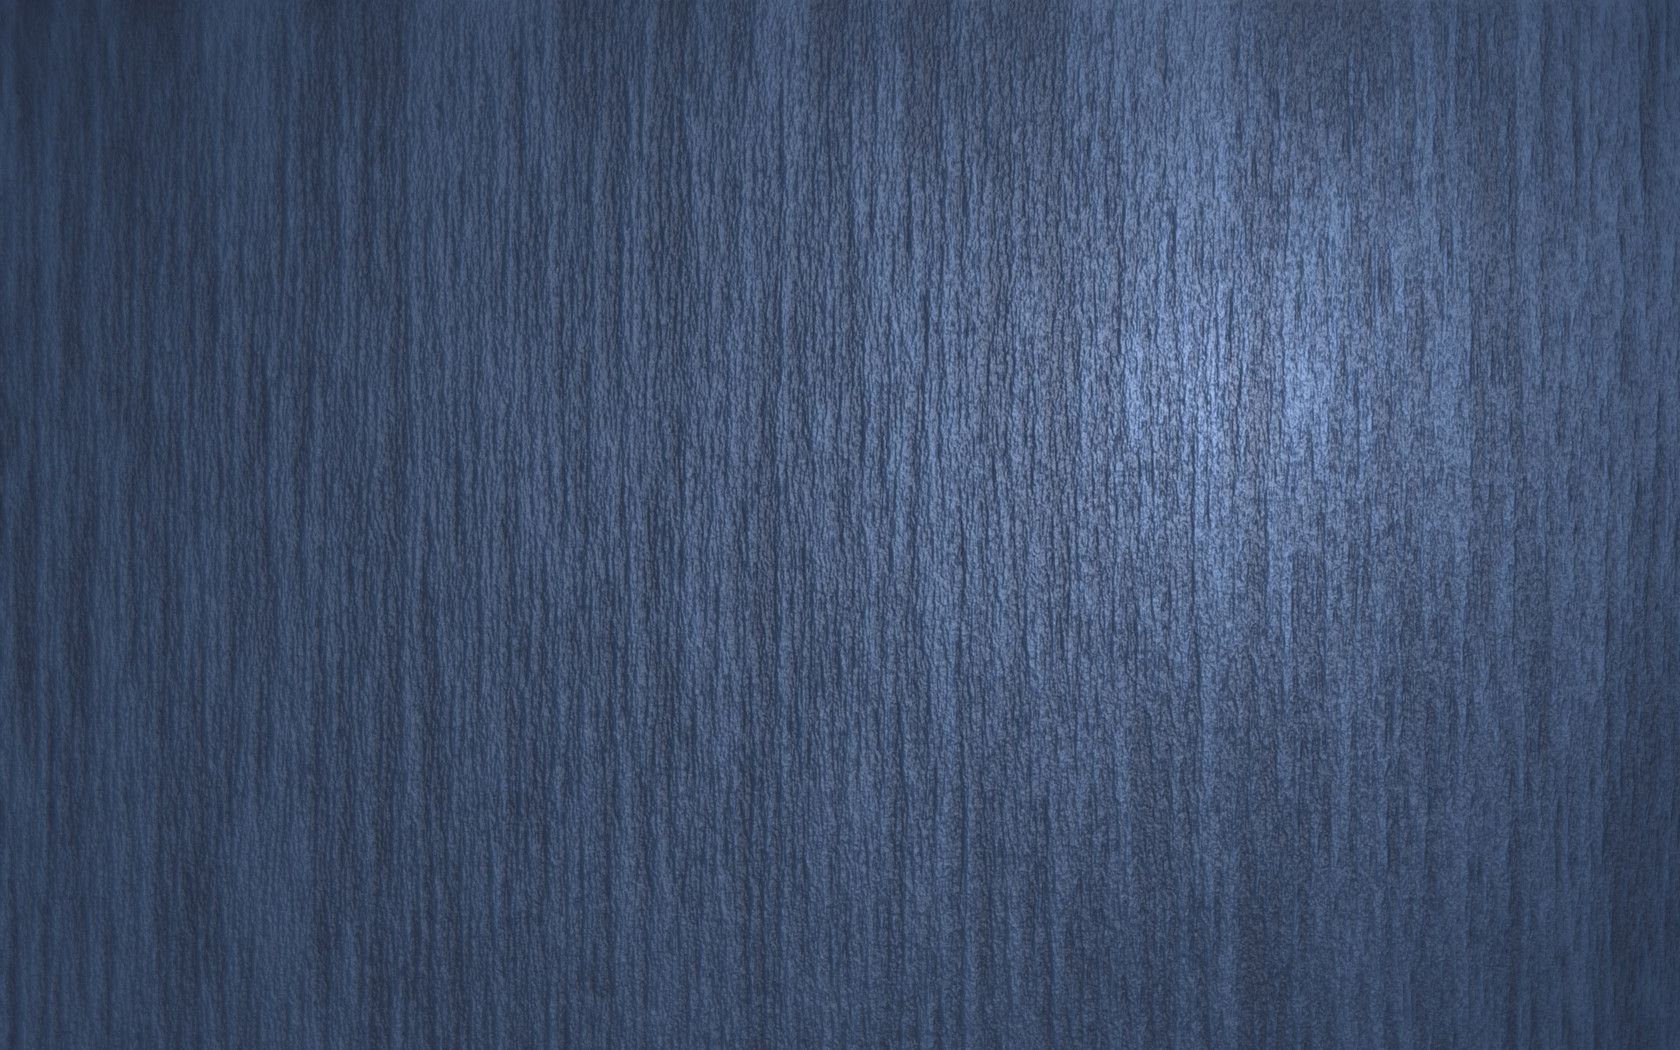 Hd Textured Wallpapers - jaidendesigns.com